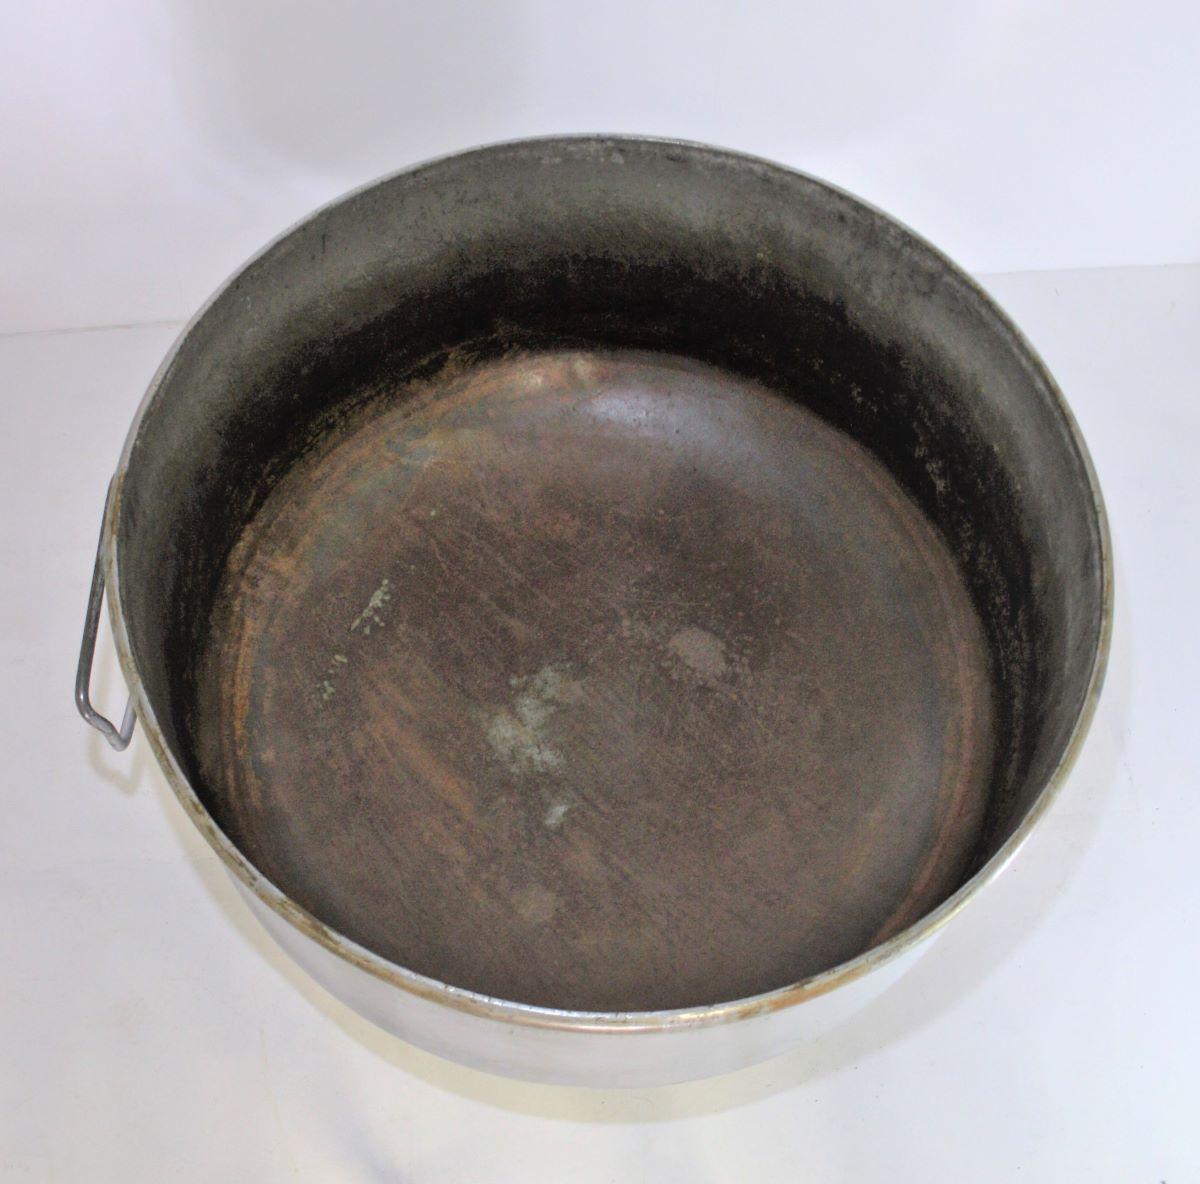 A very large industrial bakery mixing bowl on a heavy cast iron frame with castors.
This came from an old bread making bakery in Wales where it was used to mix dough for over 60 years. A great piece of heavy industrial history which will live on as